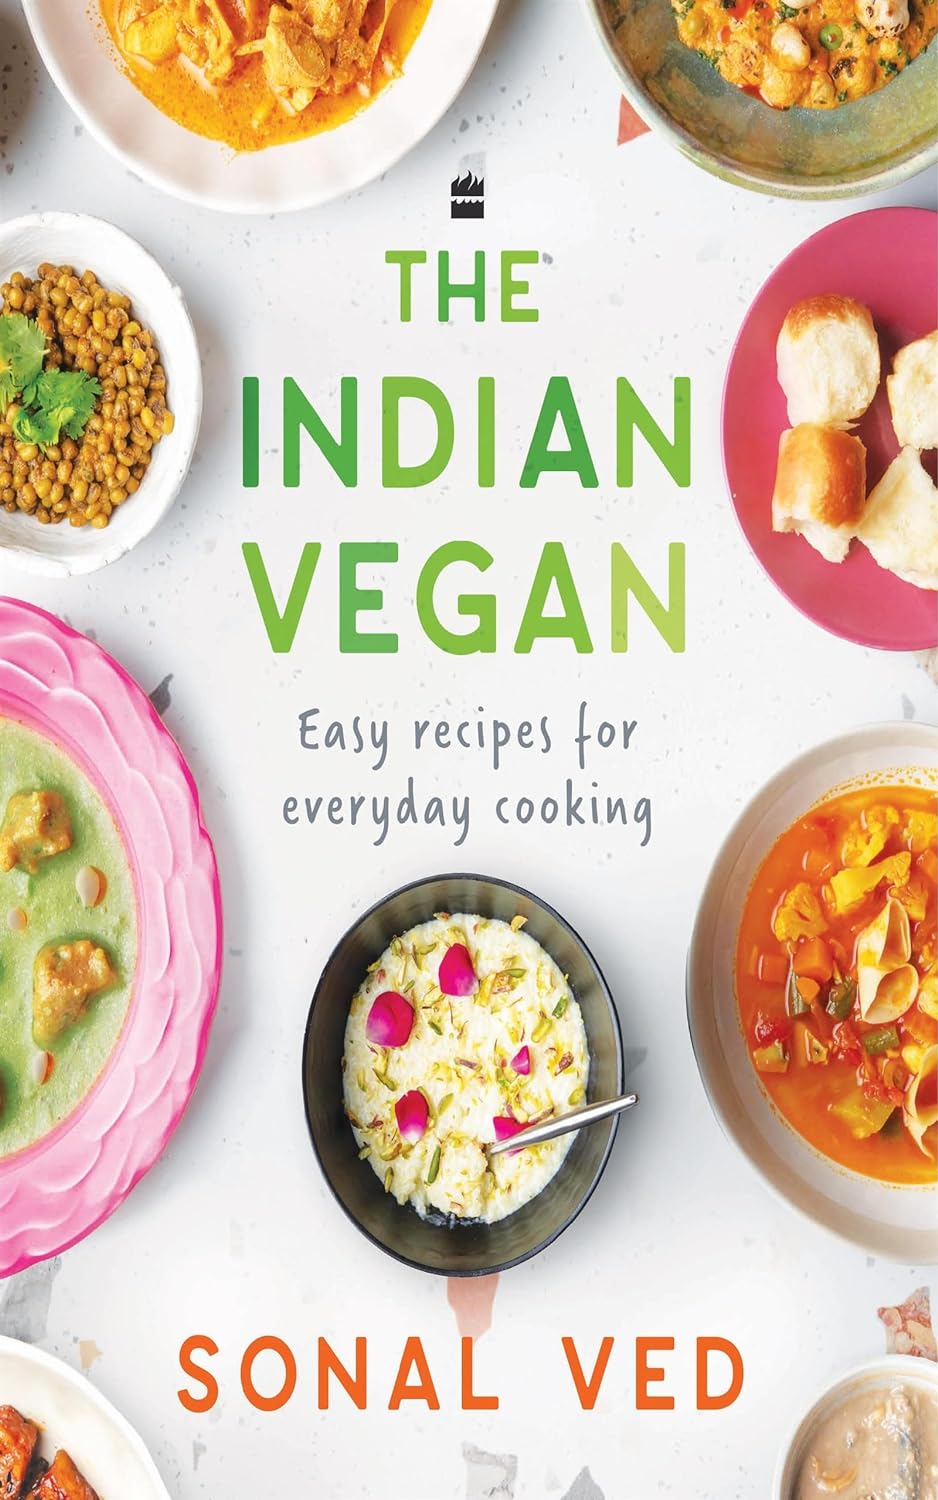 The Indian Vegan: Easy Recipes for Everyday Cooking